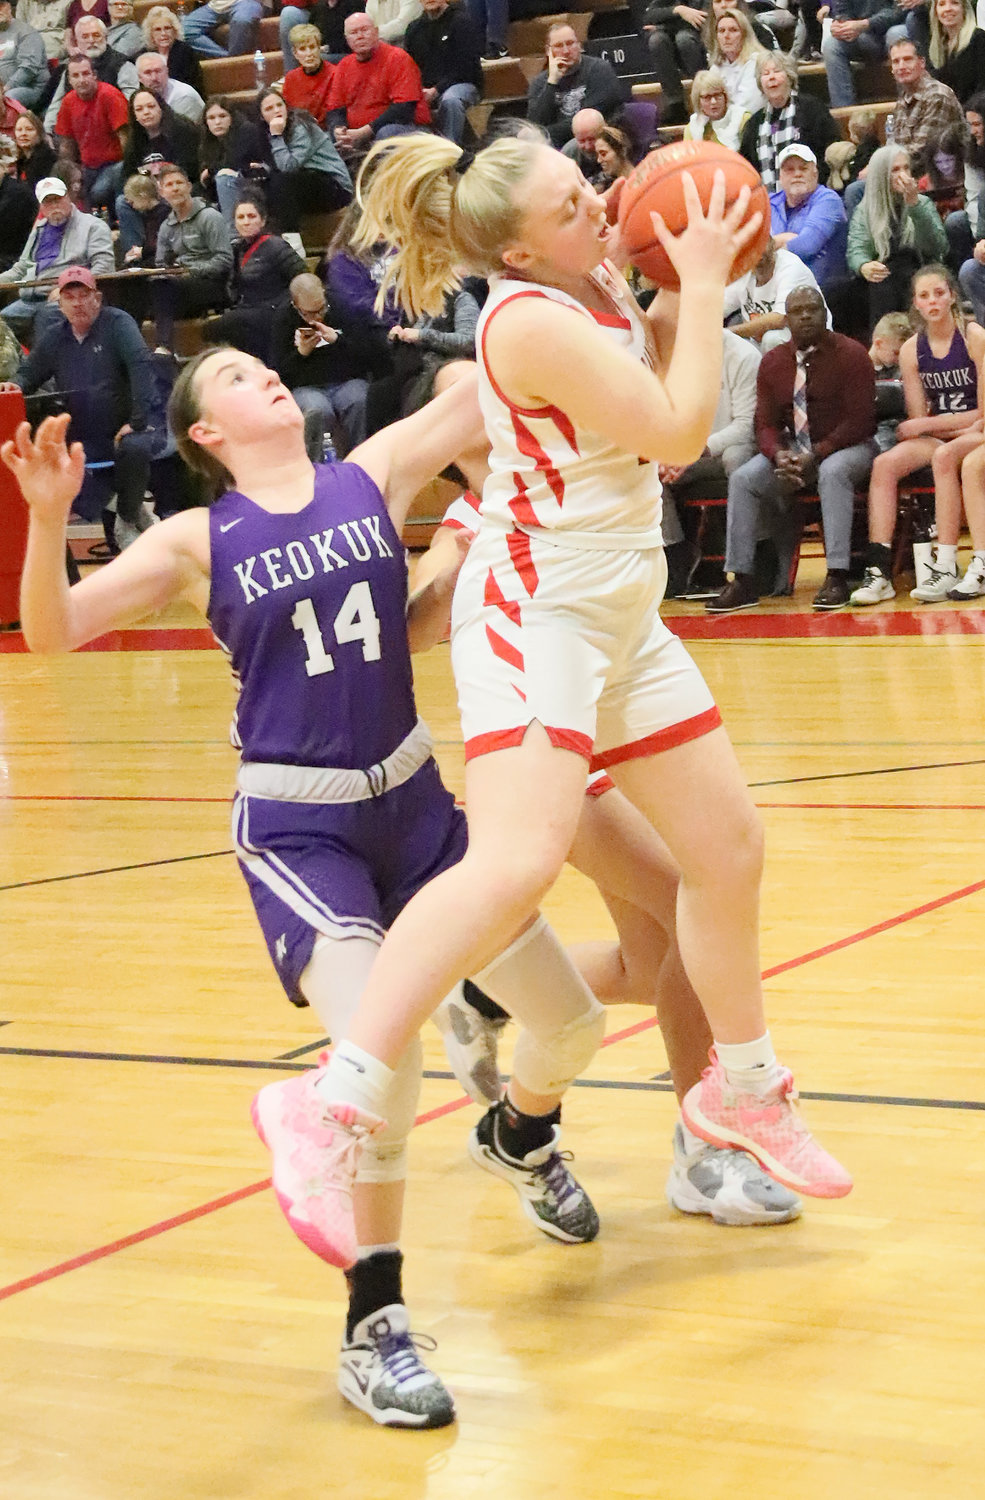 Fort Madison senior Molly Knipe drives in the third quarter of Friday night's loss to Keokuk. The Hounds came up just short after cutting the lead to three in the fourth quarter.